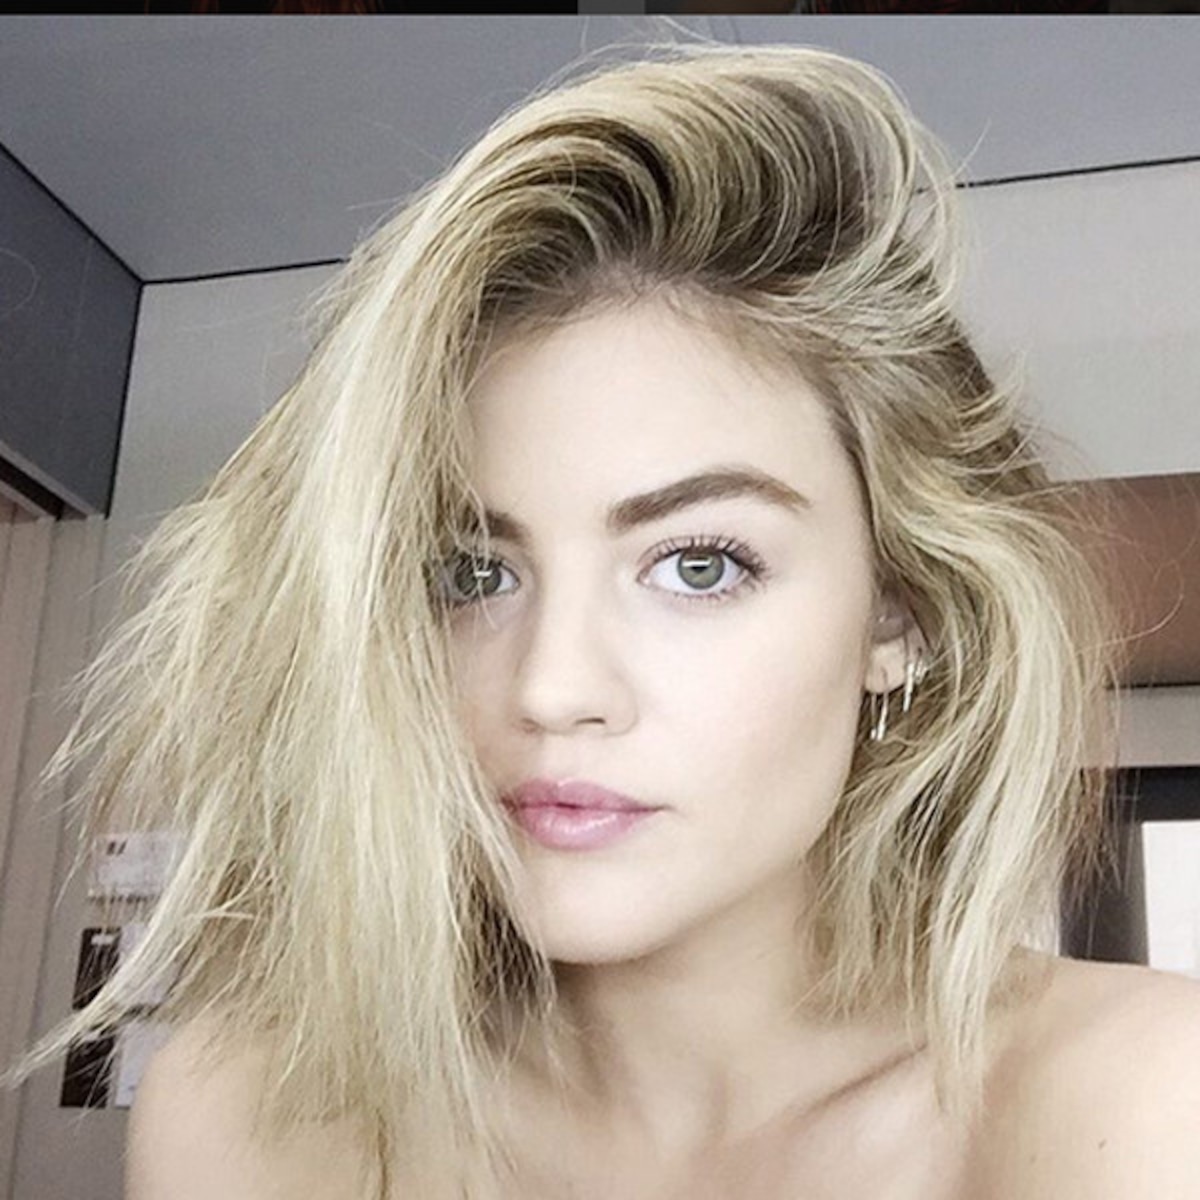 Lucy hale leaked topless pics